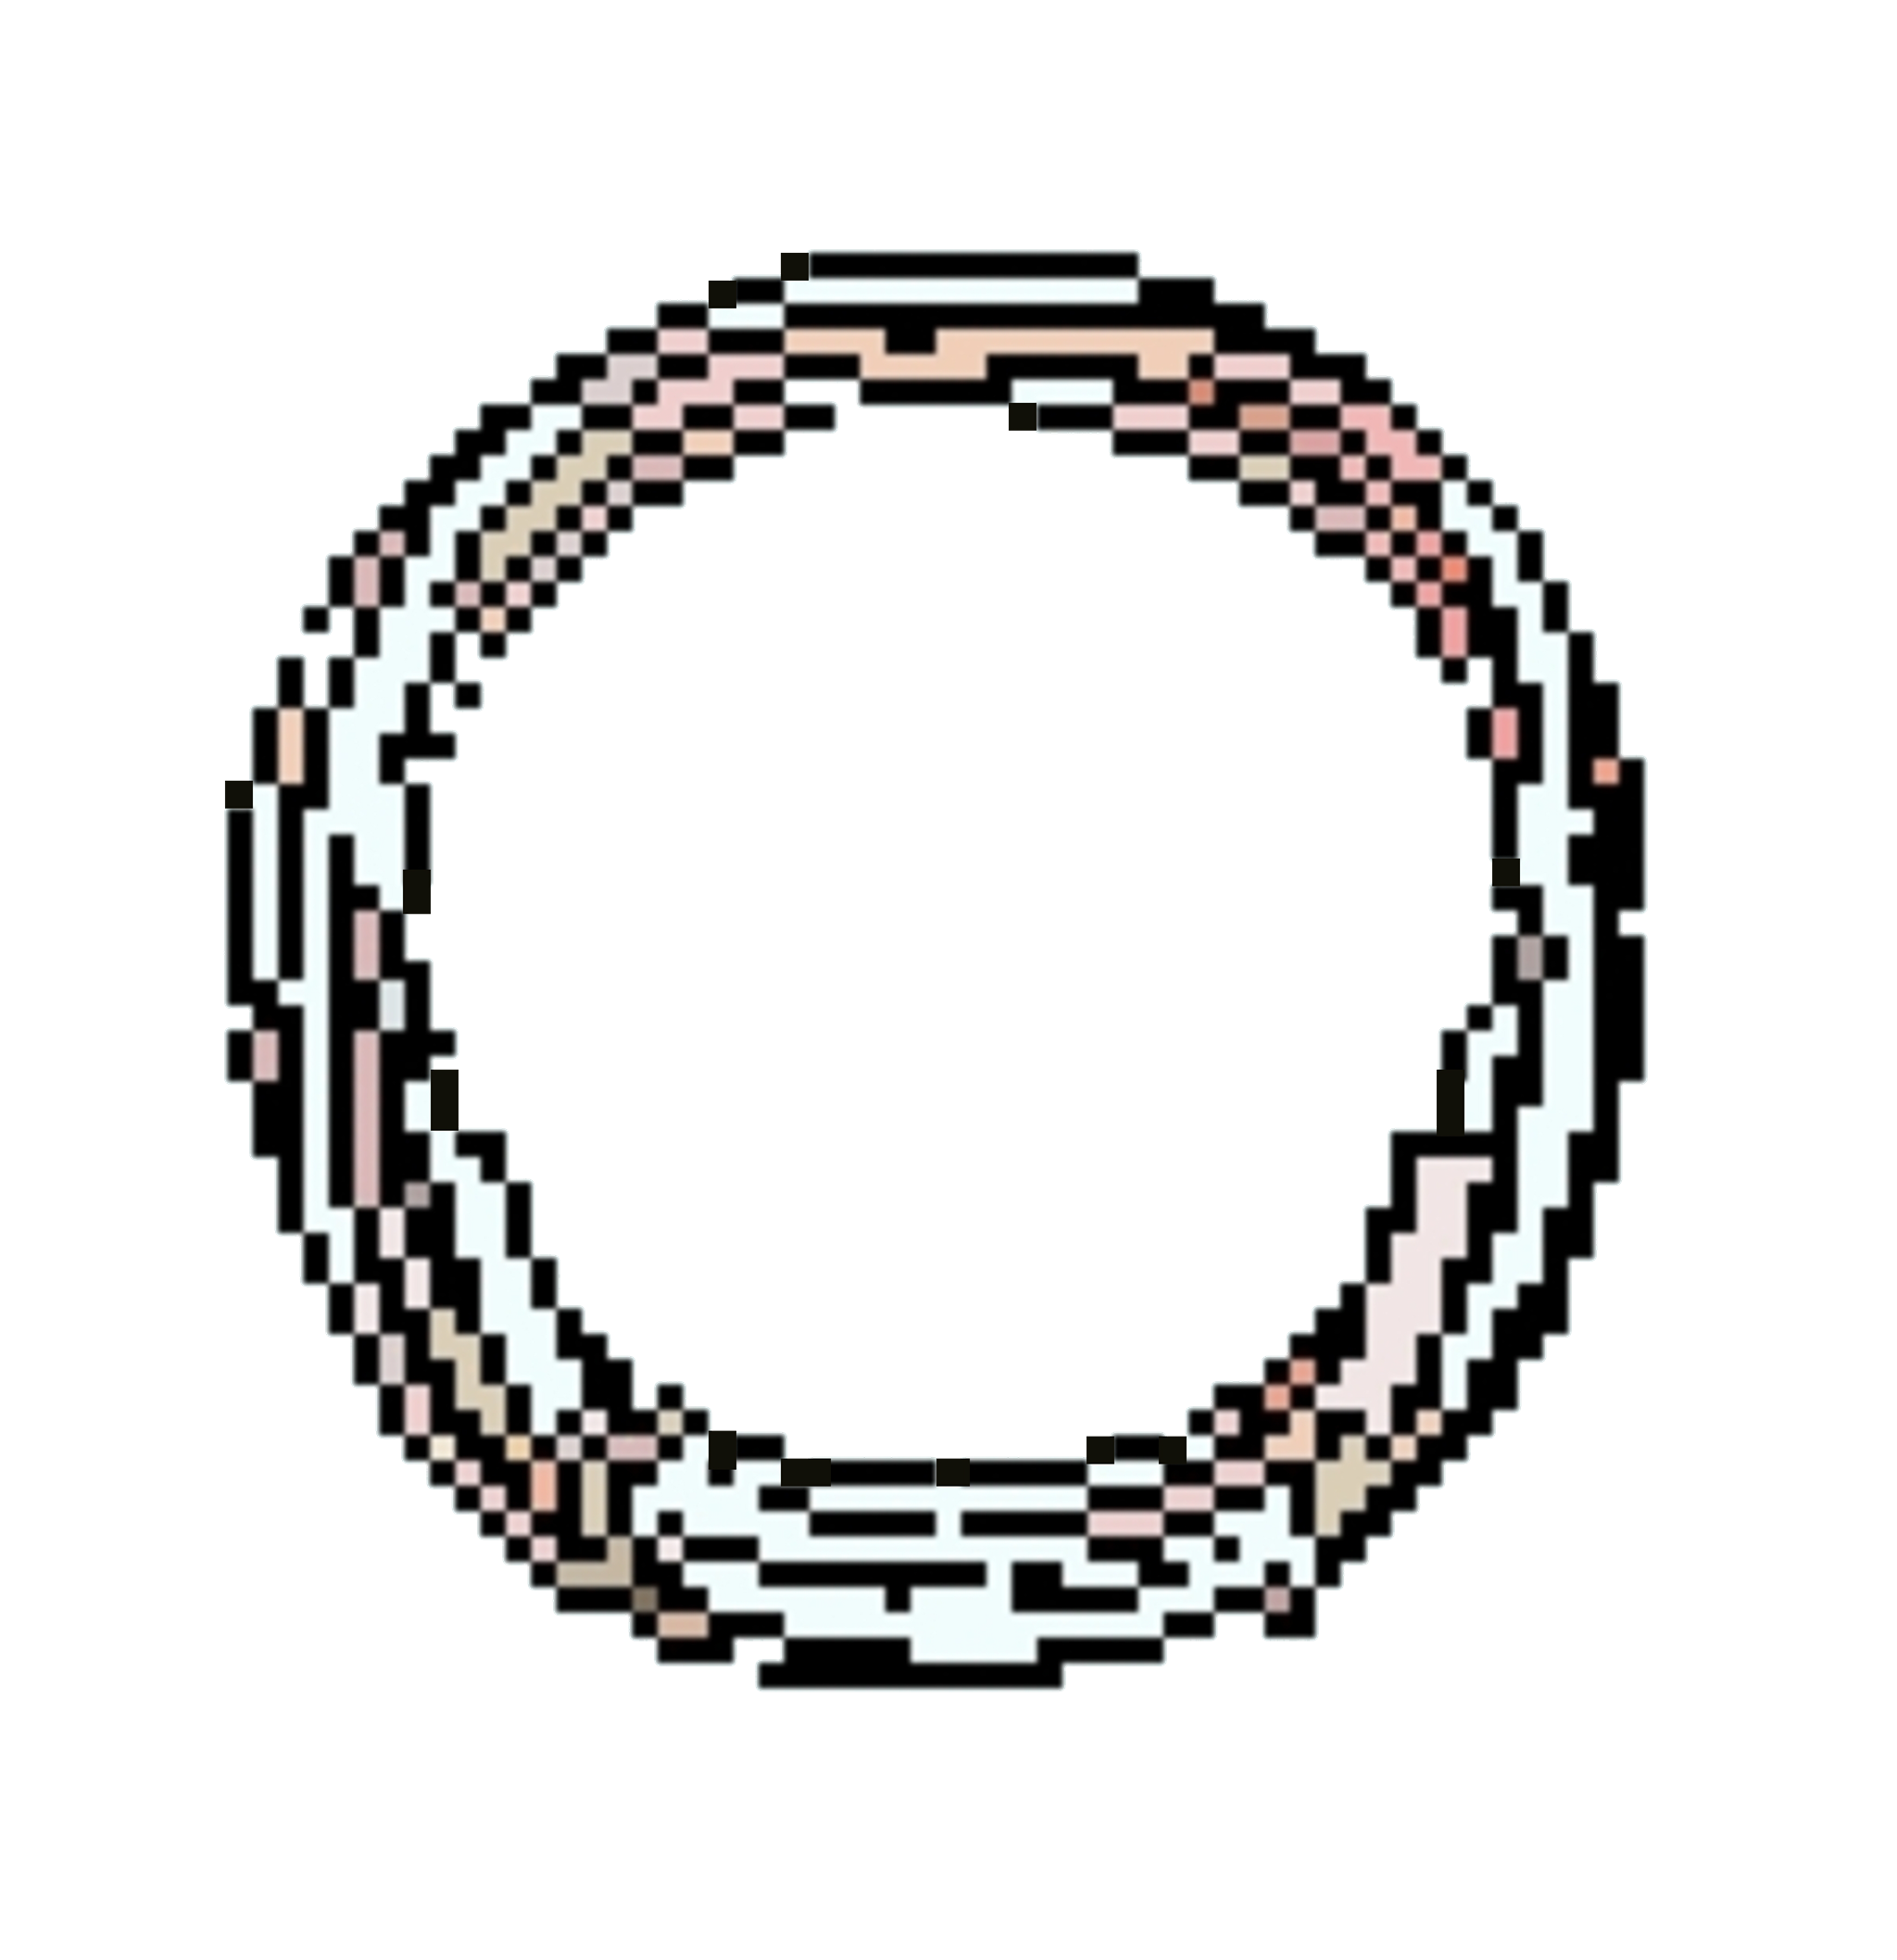 Pixel art of a Fender shell pink cable